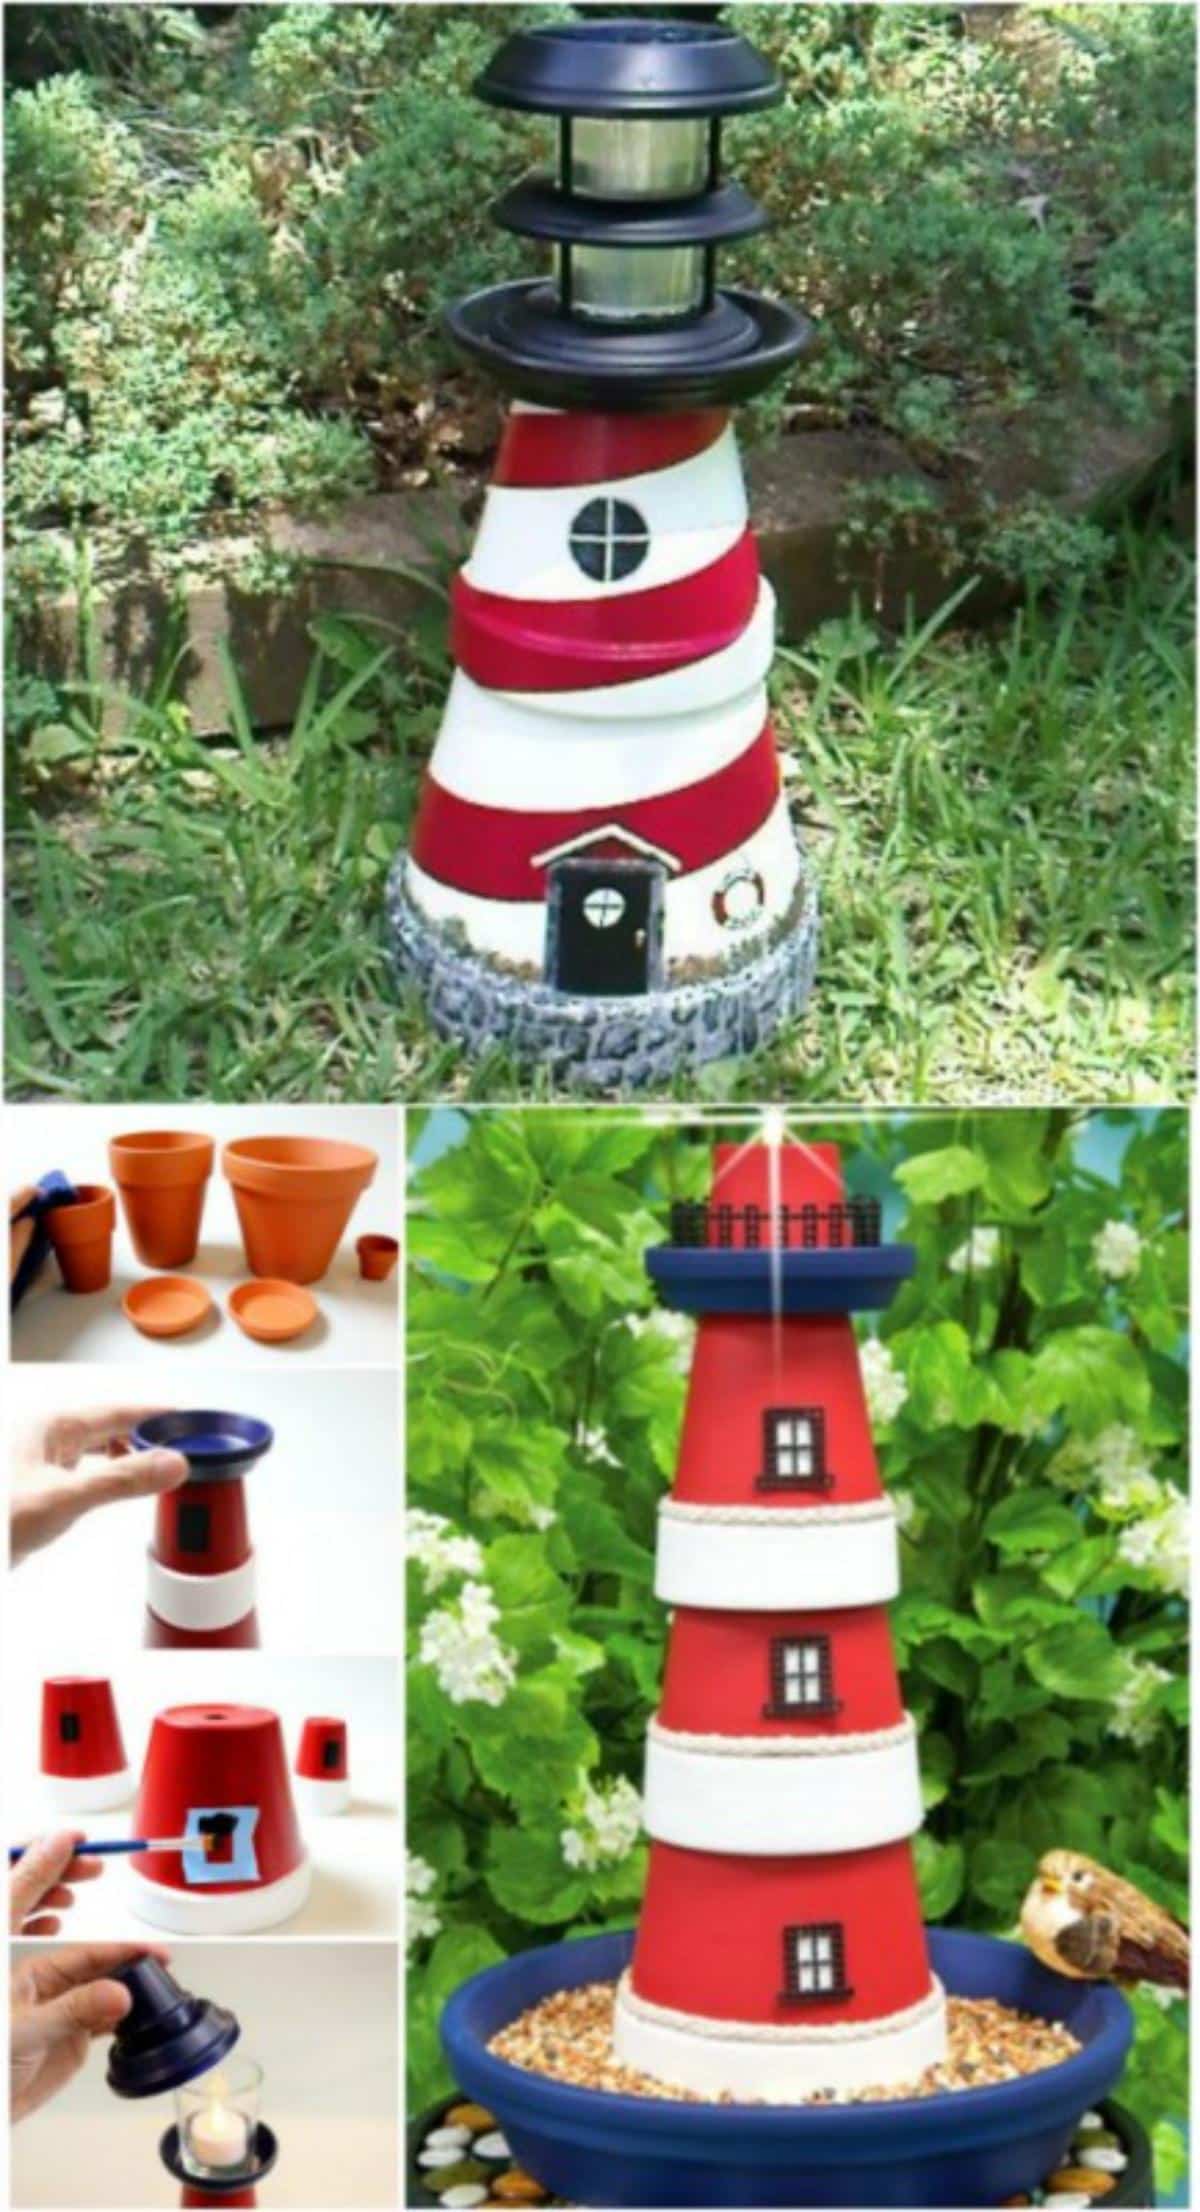 Pot Lighthouse collage.